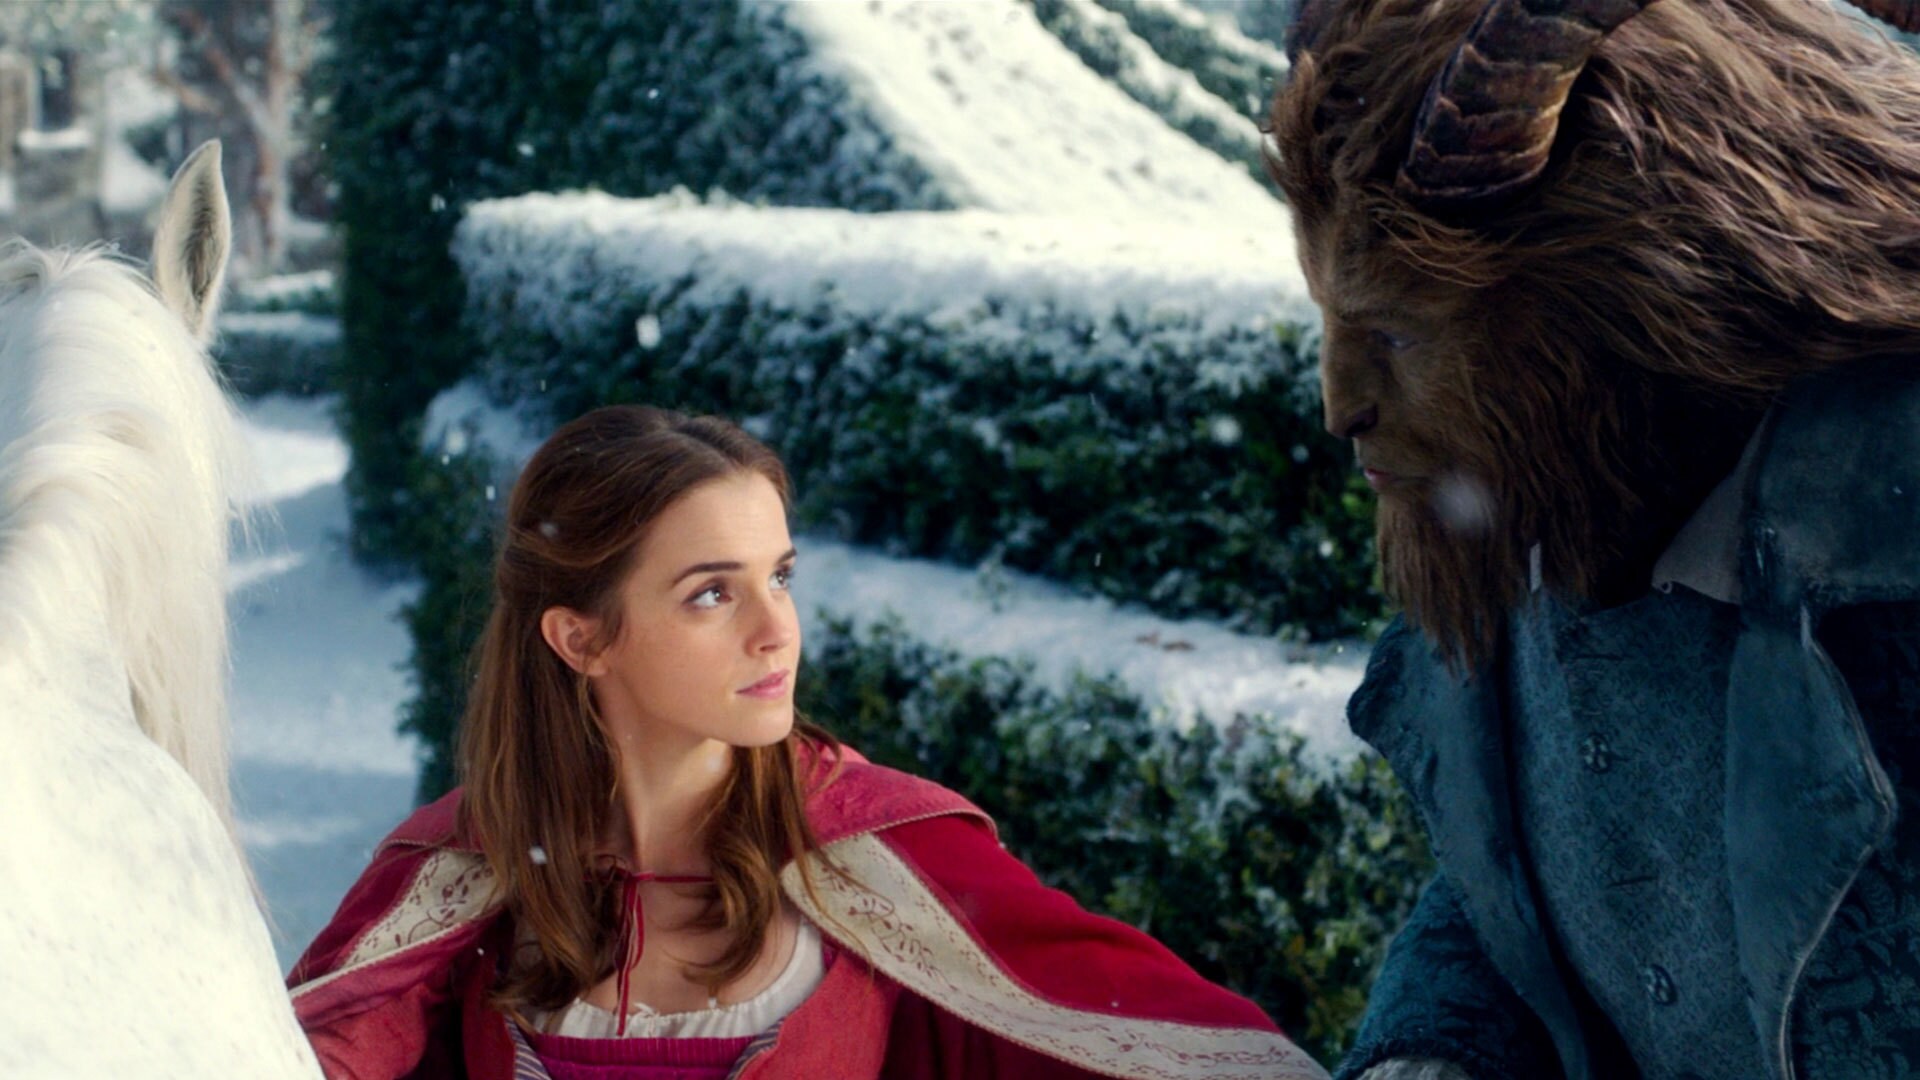 Beauty and the Beast | Disney Movies